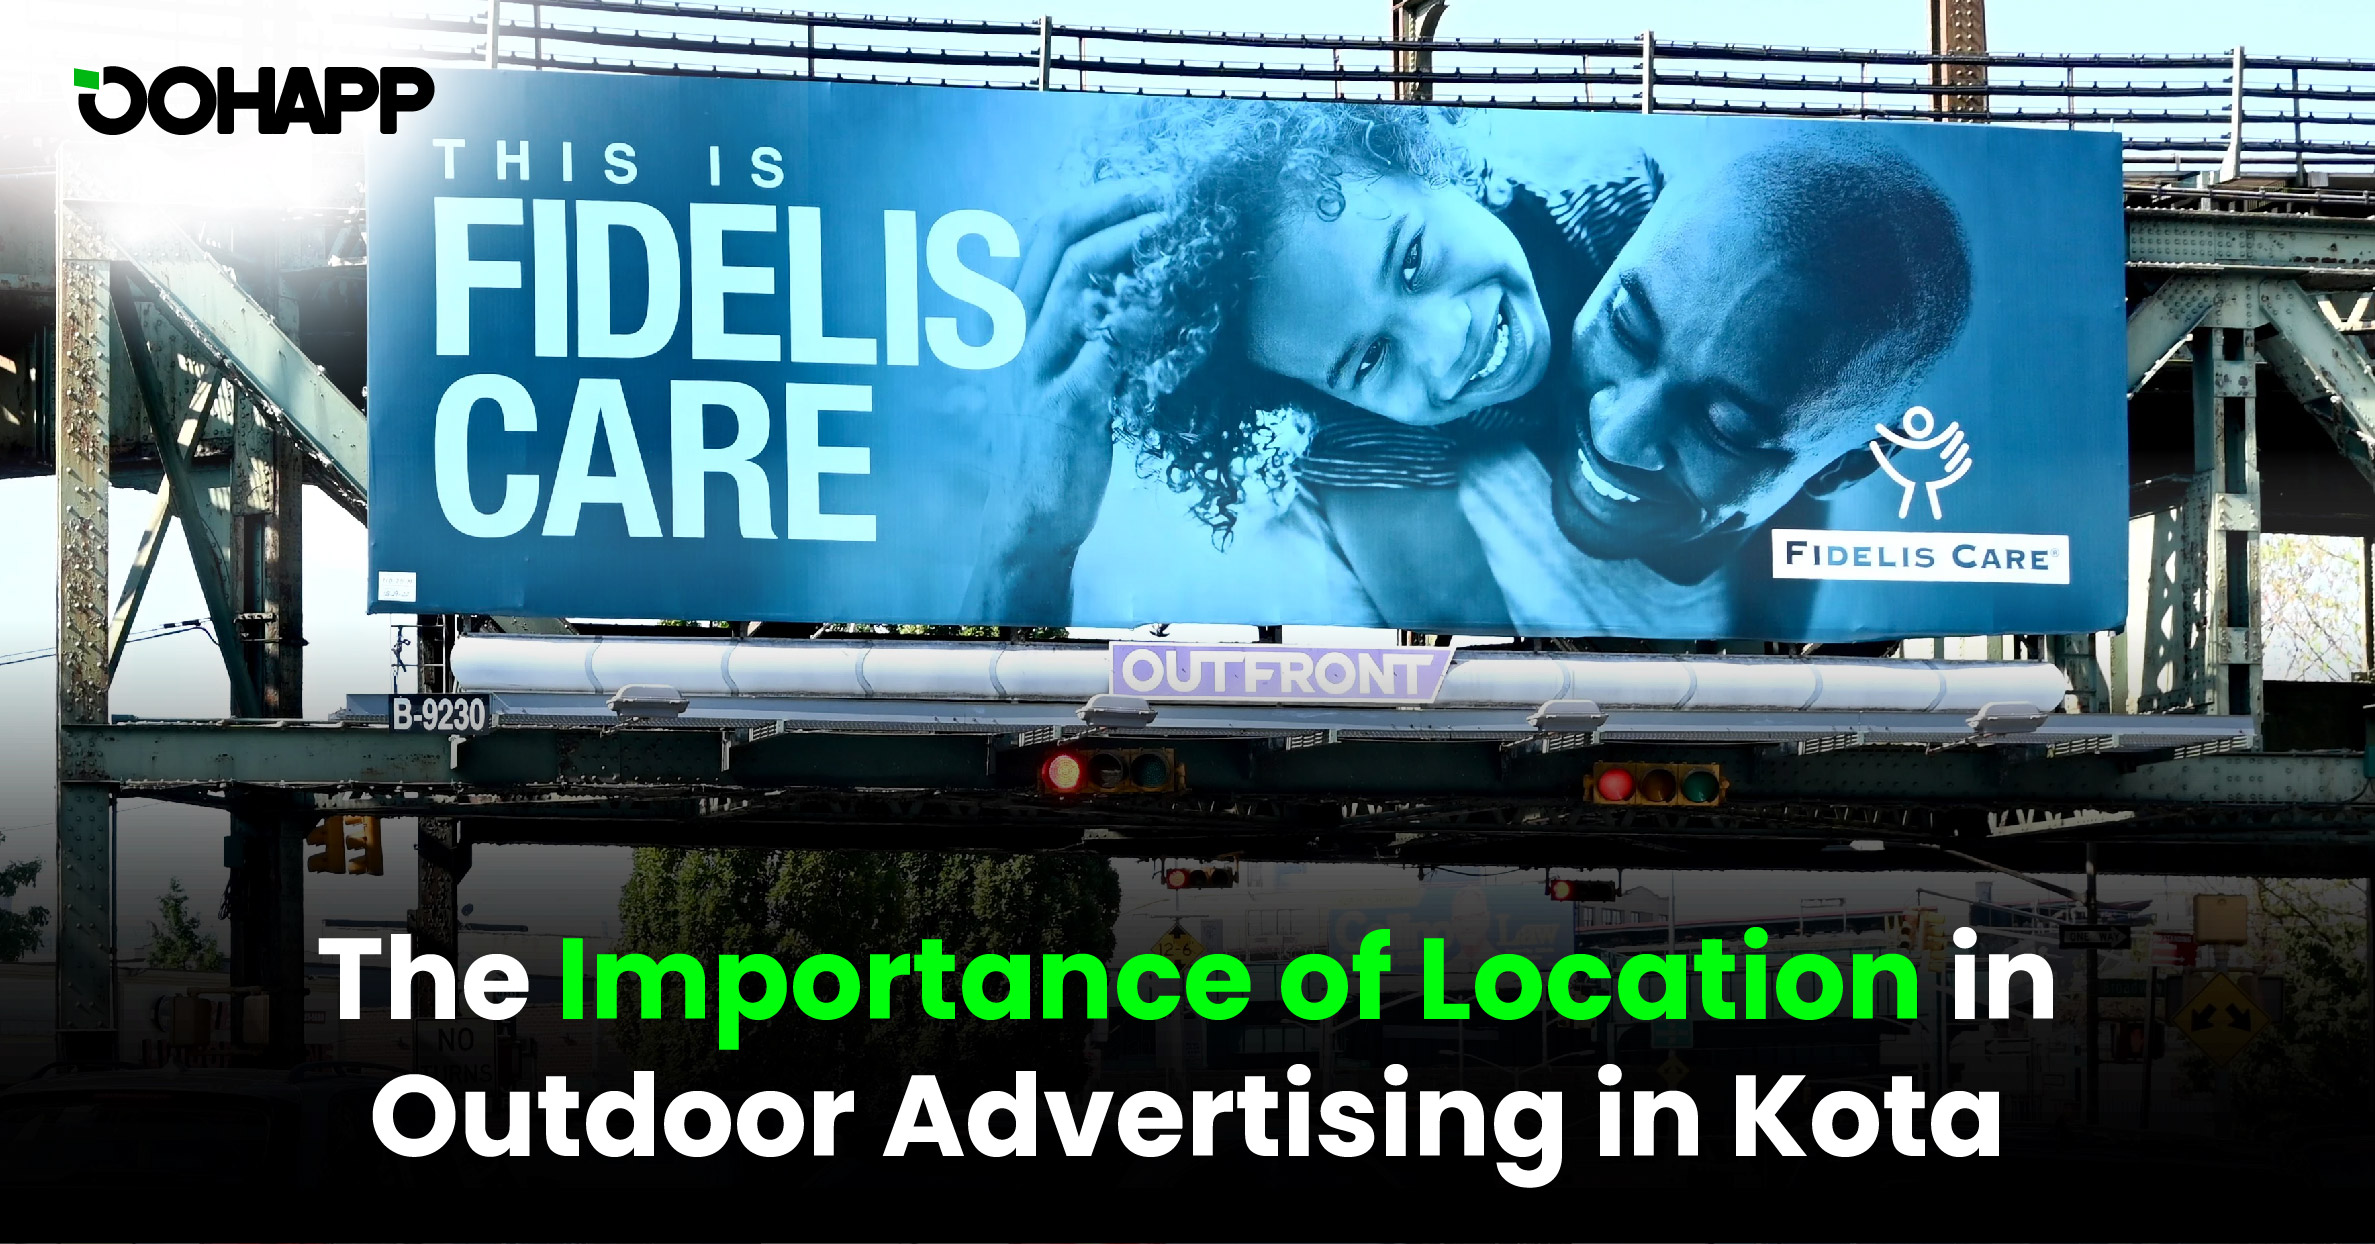 The Importance of Location in Outdoor Advertising in Kota